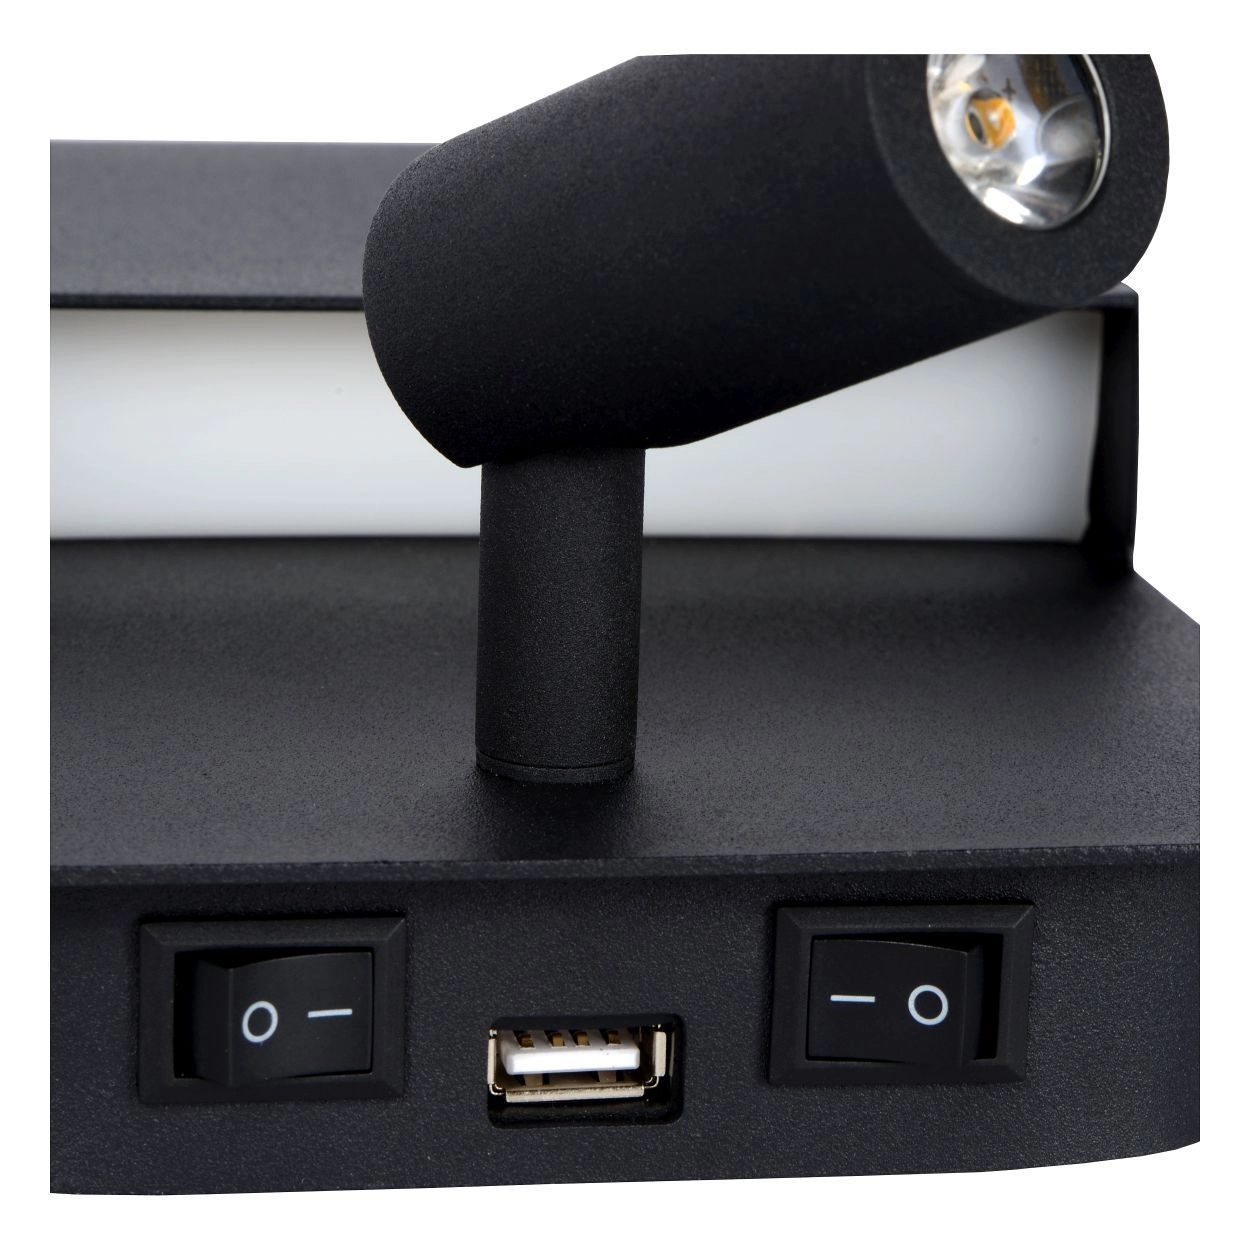 LU 79200/08/30 Lucide BOXER - Wall light - LED - 1x10W 3000K - With USB charging point - Black